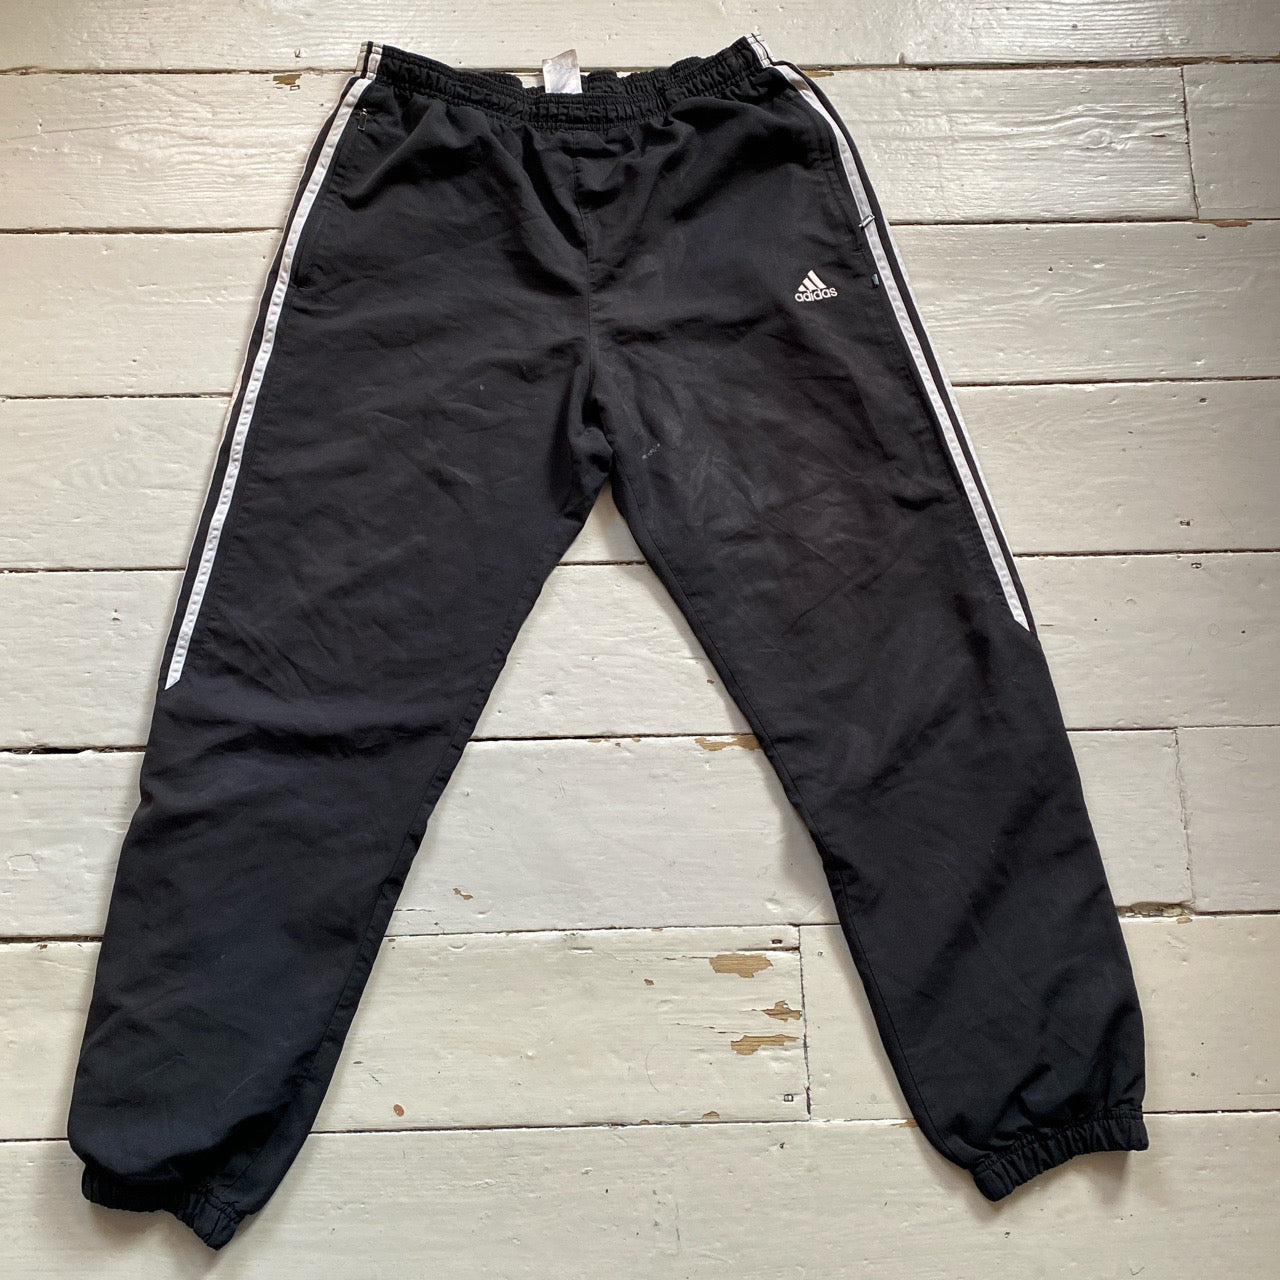 Adidas Black and White Shell Bottoms (W34)